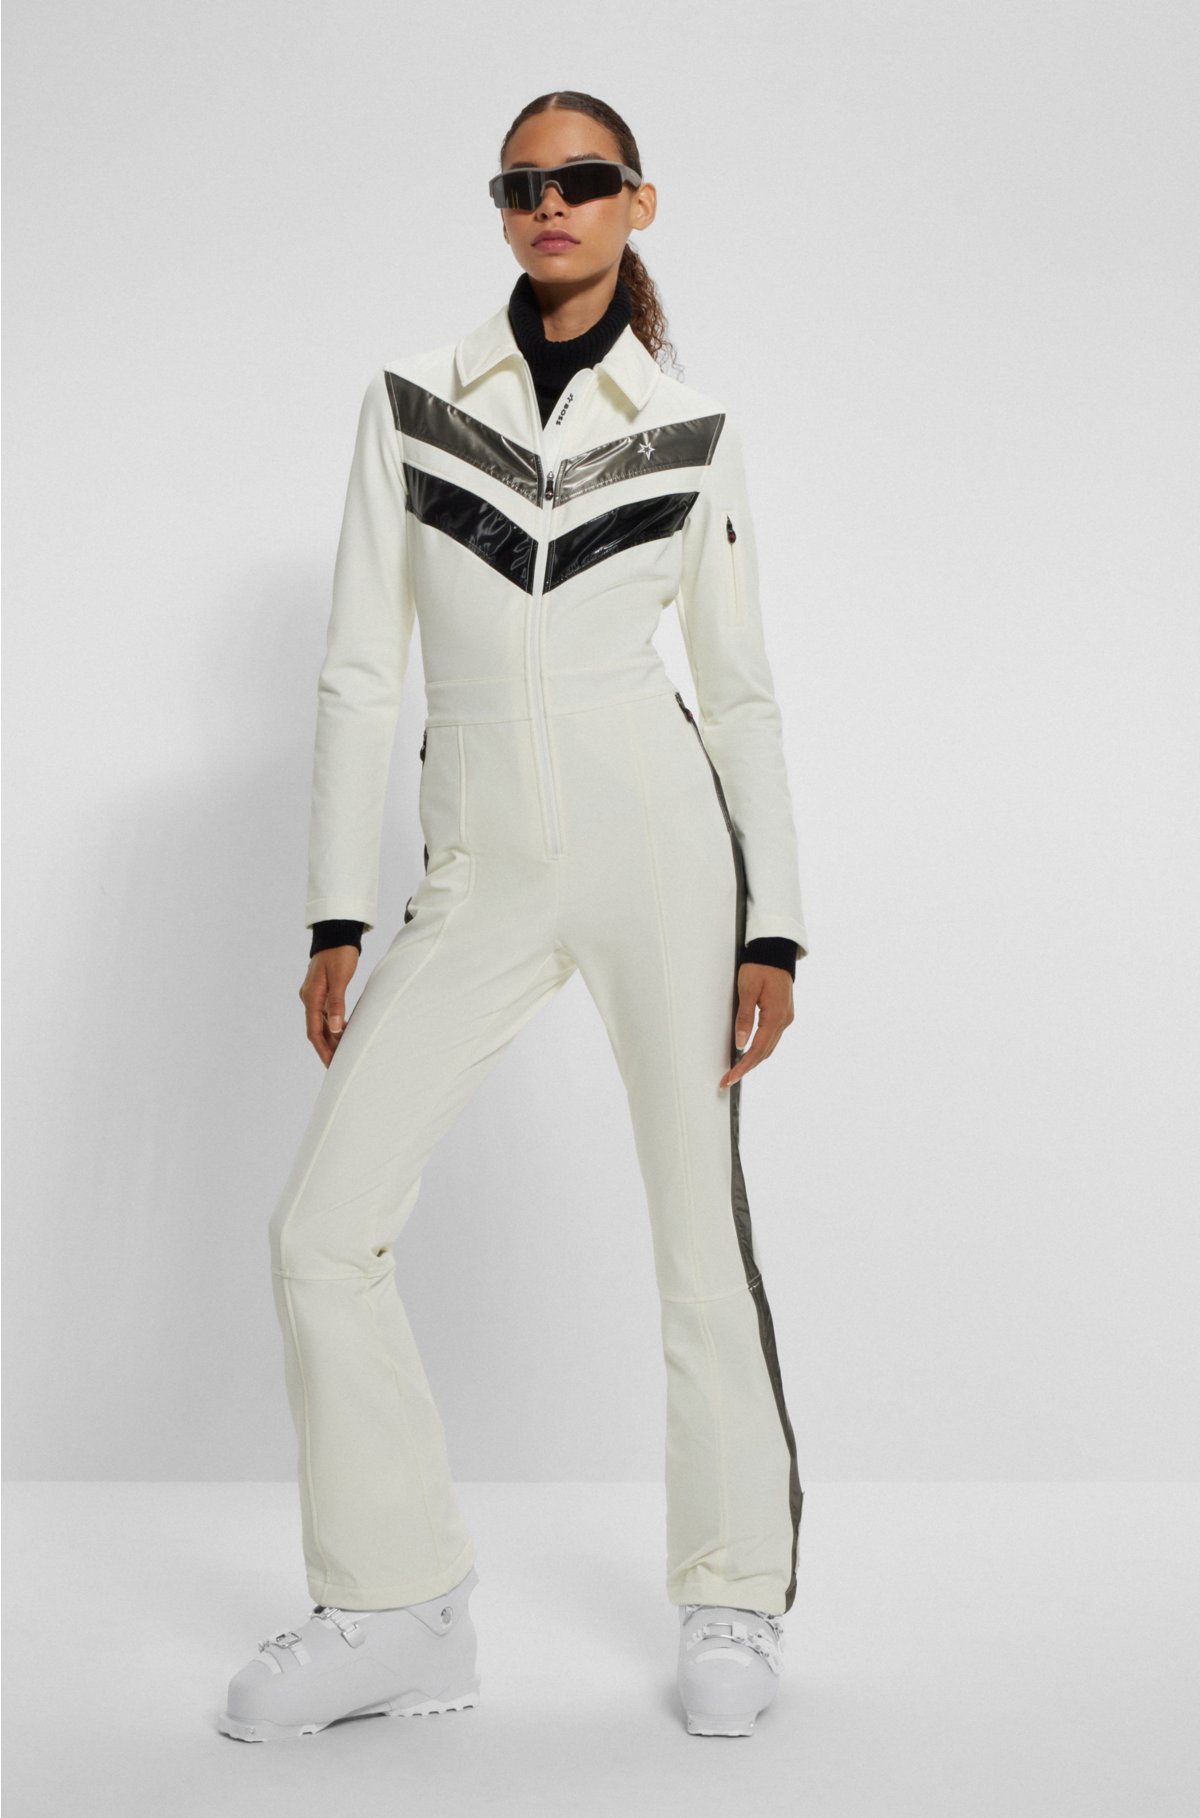 BOSS x Perfect Moment branded ski suit with stripes